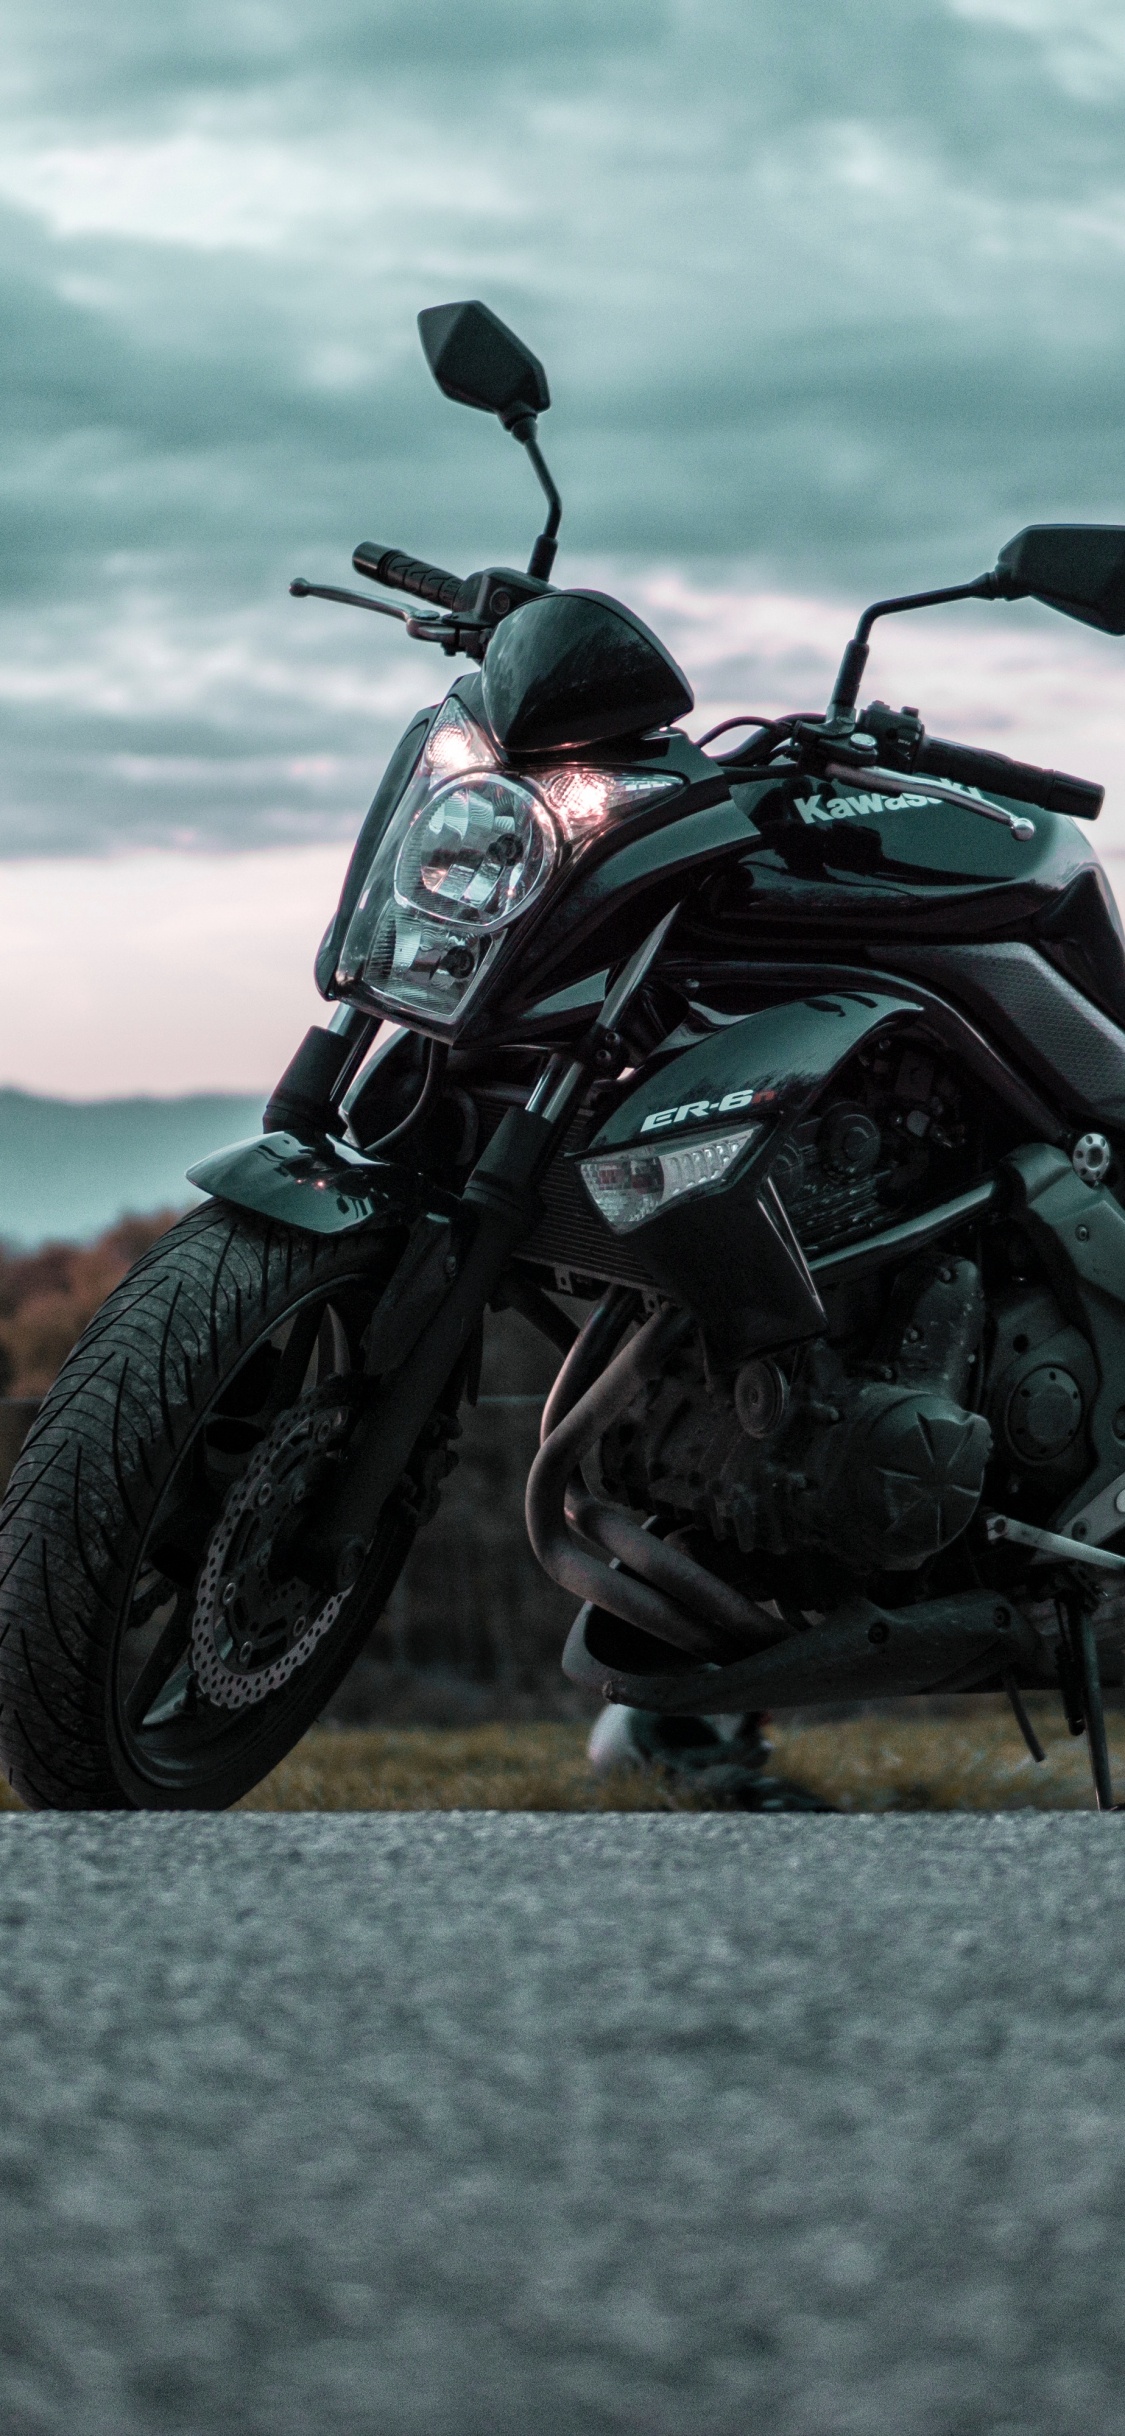 Black and Gray Motorcycle on Gray Asphalt Road During Daytime. Wallpaper in 1125x2436 Resolution